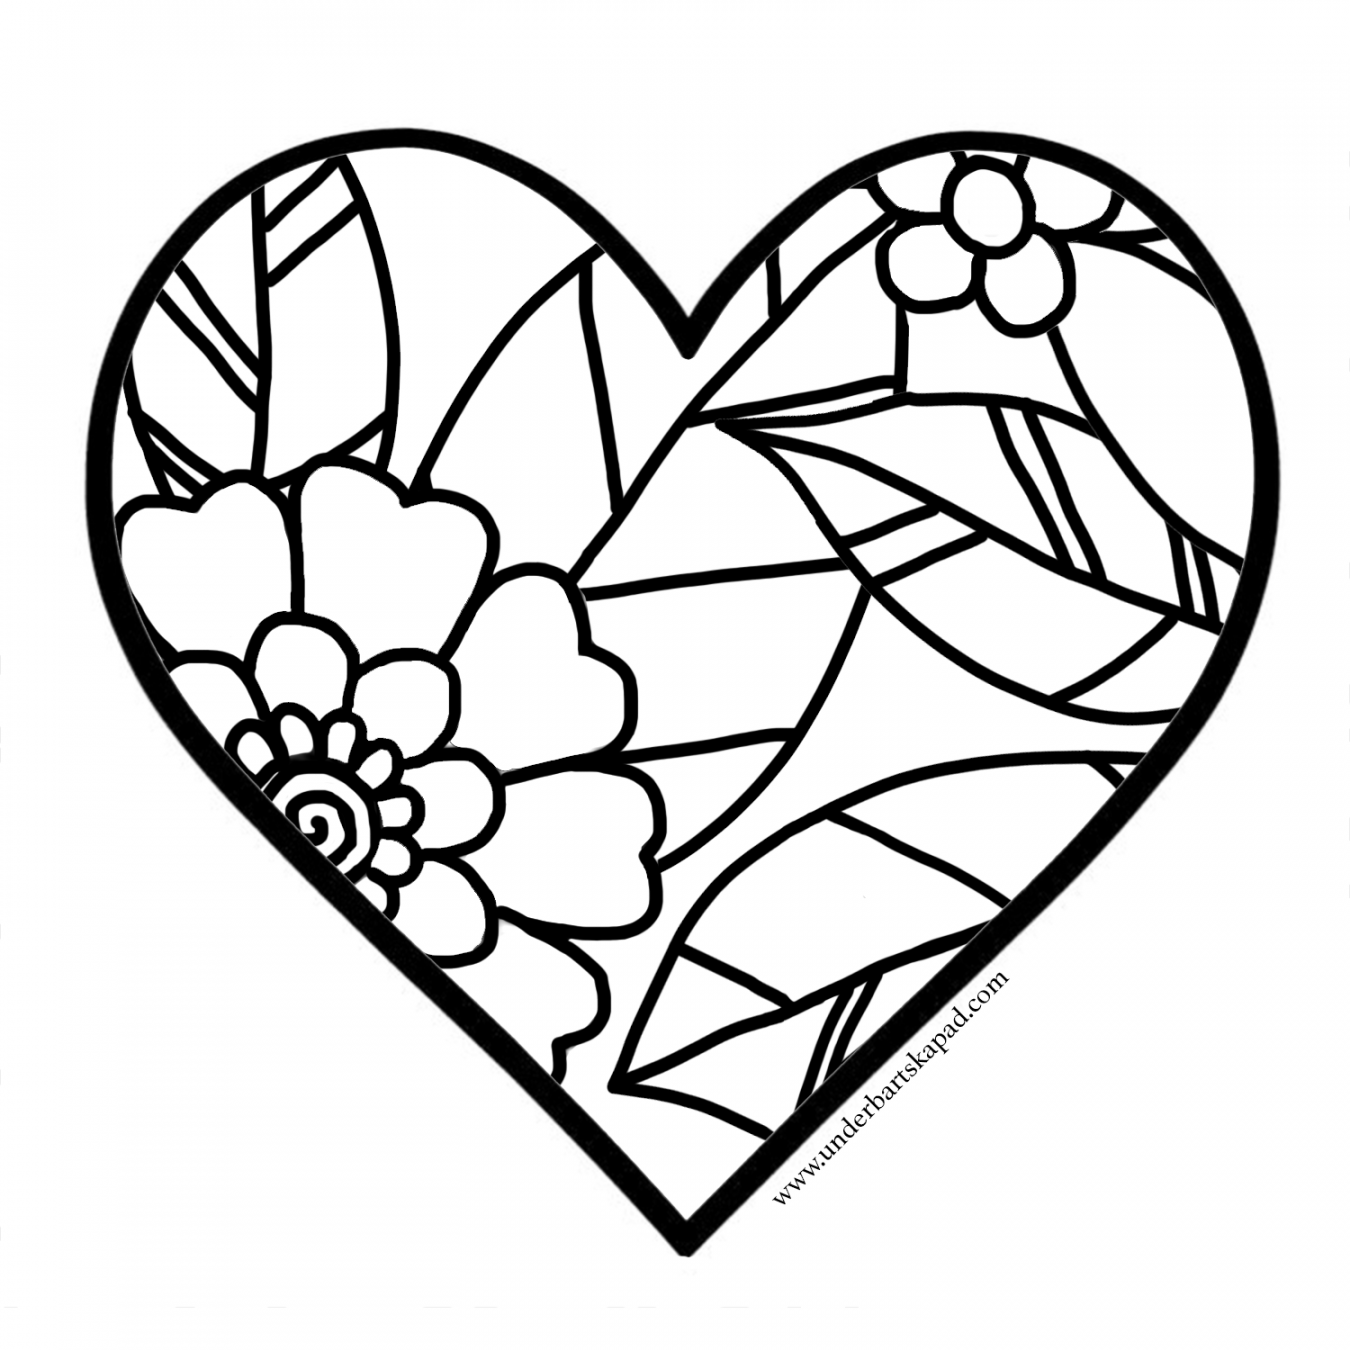 Free Printable Heart Coloring Pages - Printable - Heart Coloring Pages - FREE Download - Underbart skapad